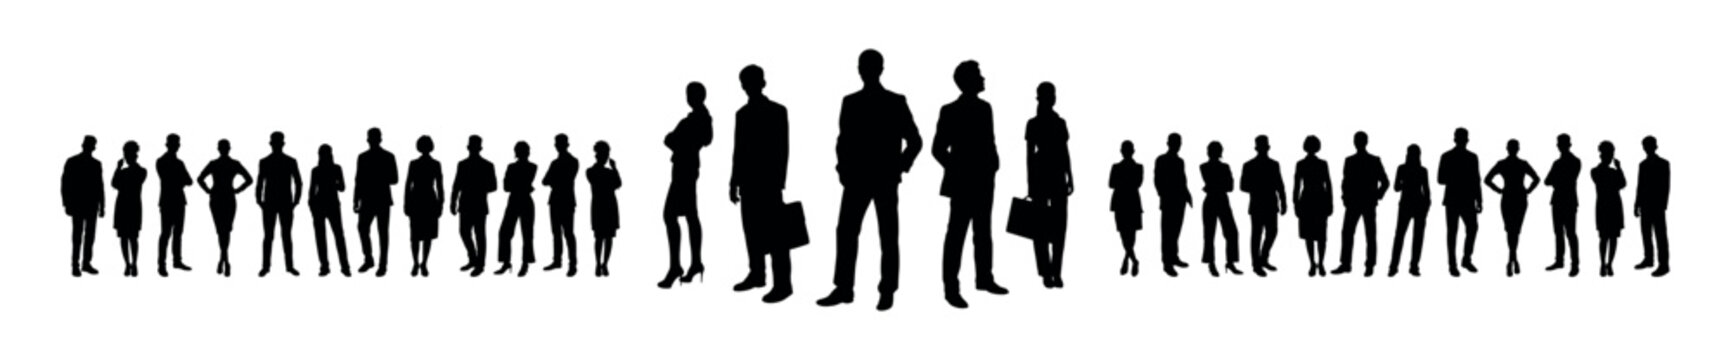 Confident business team standing and posing in front of business people vector silhouettes.